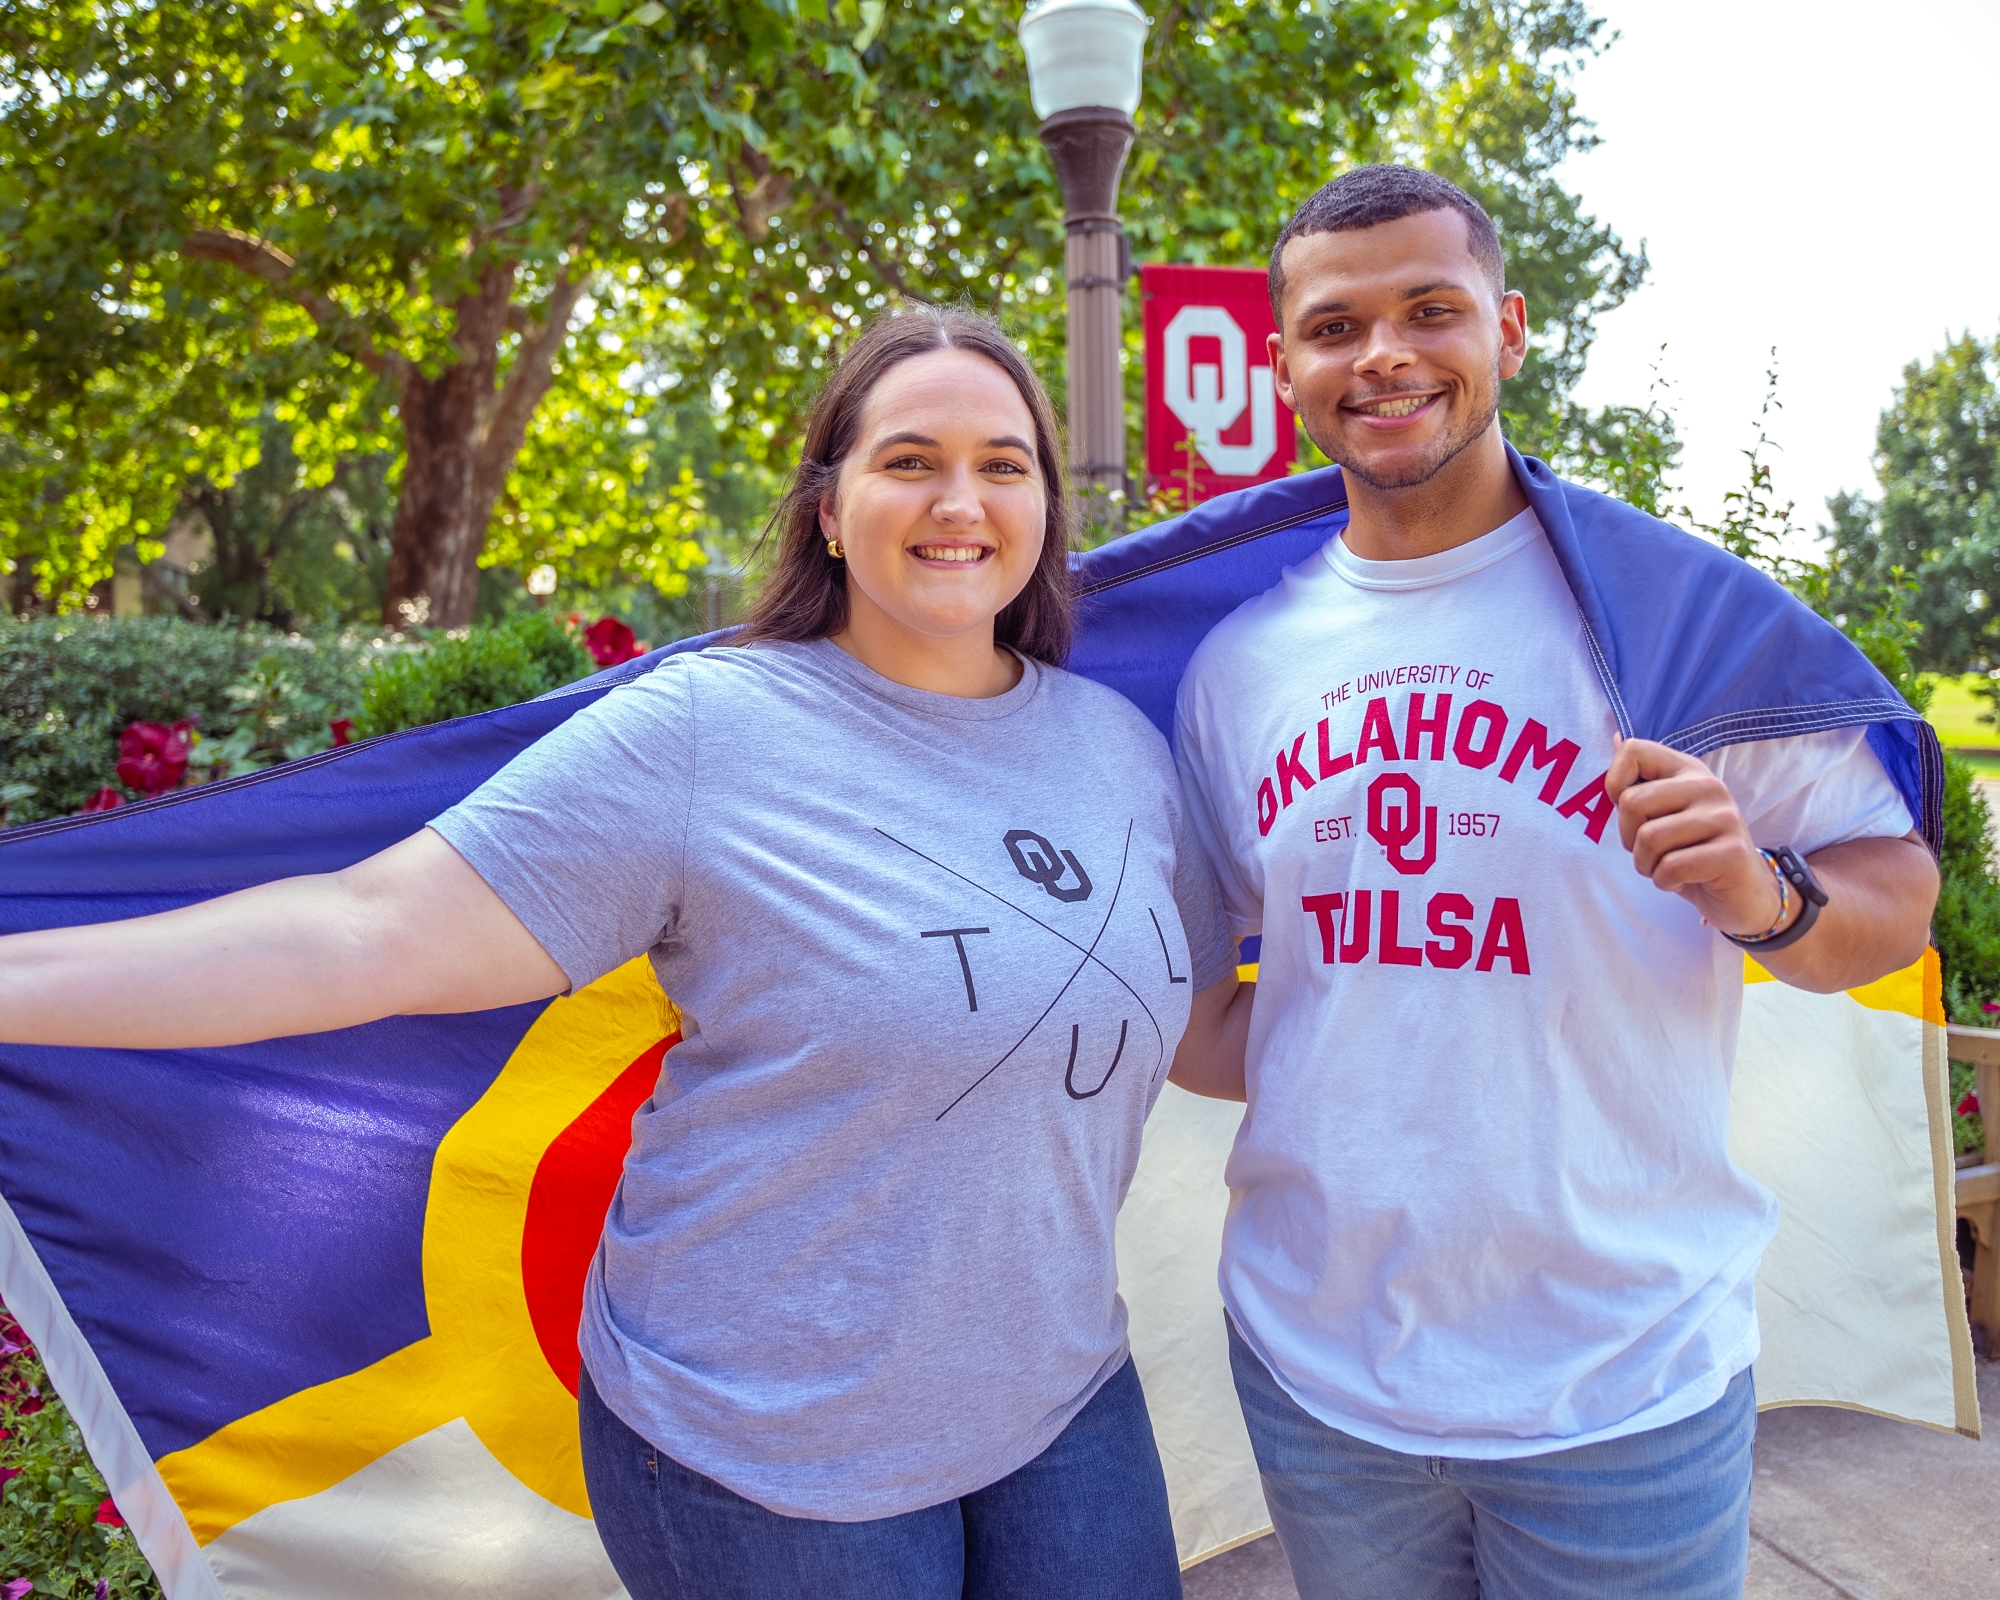 Two students in OU-Tulsa shirts hold a Tulsa flag